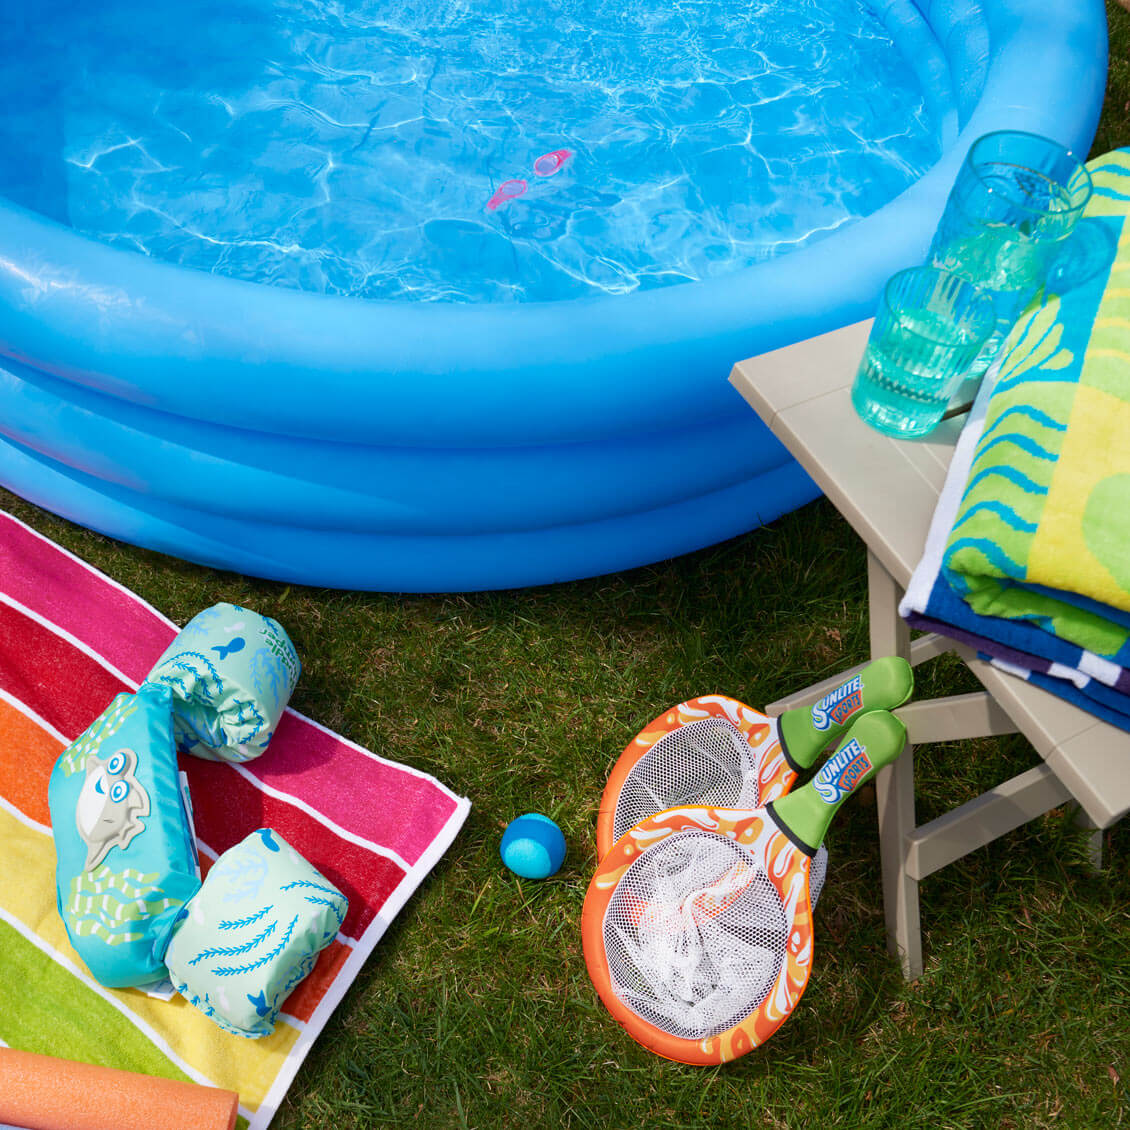 Pool activities and accessories.